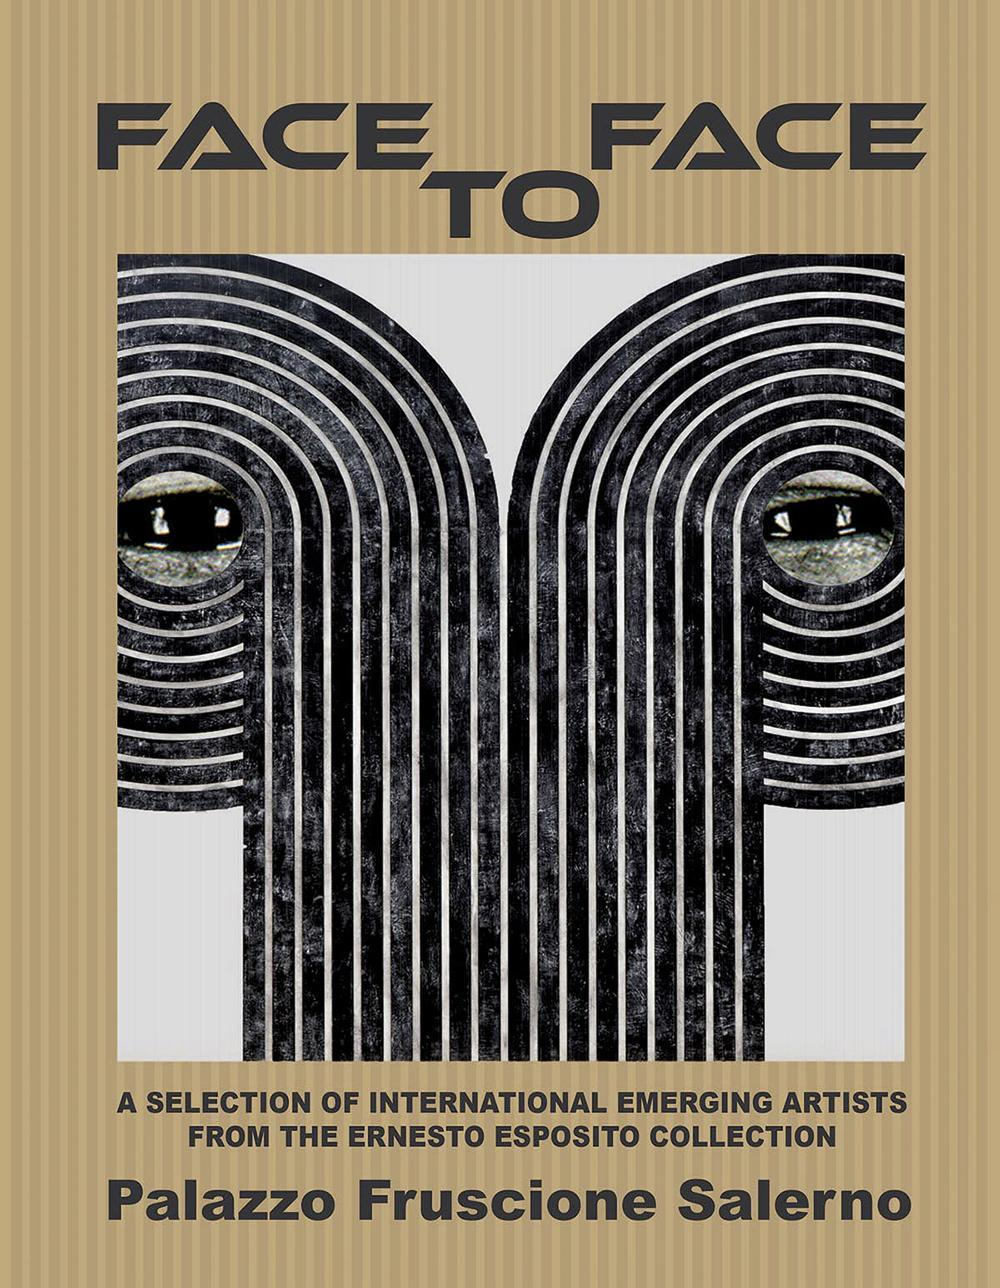 Image of Face to face. A selection of international emerging astists from the Ernesto Esposito collection